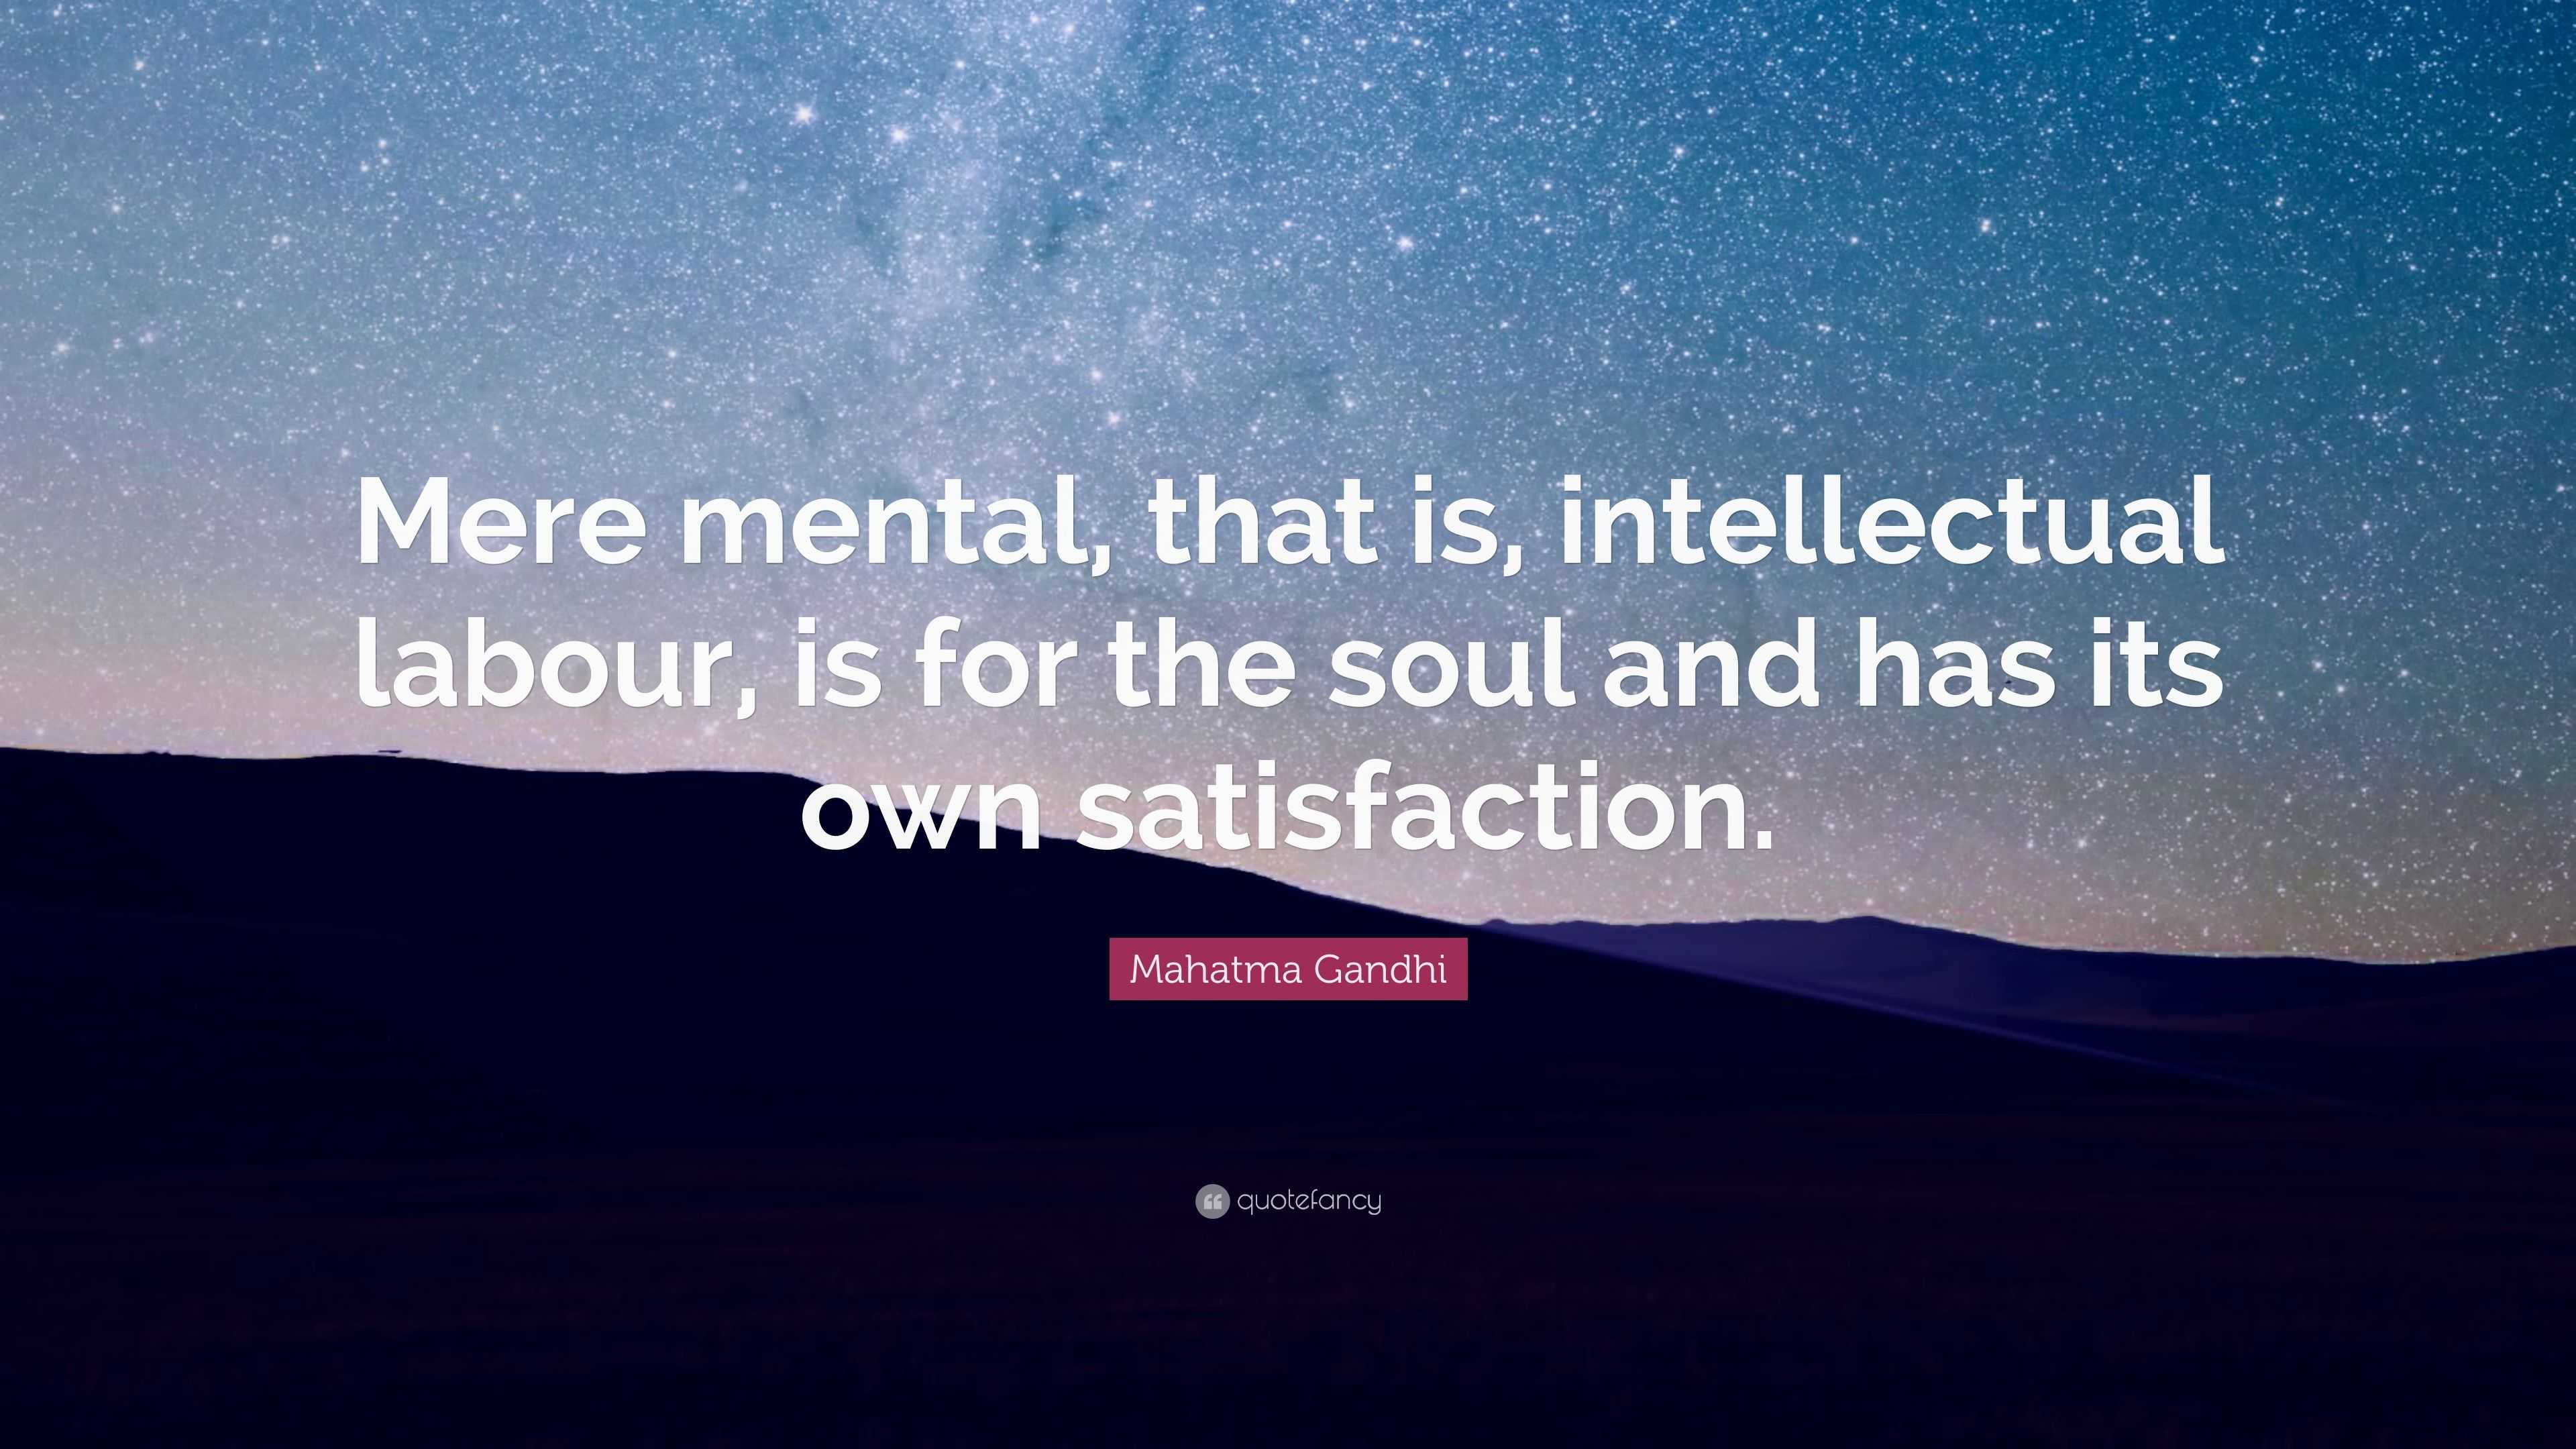 Mahatma Gandhi Quote: “Mere mental, that is, intellectual labour, is ...